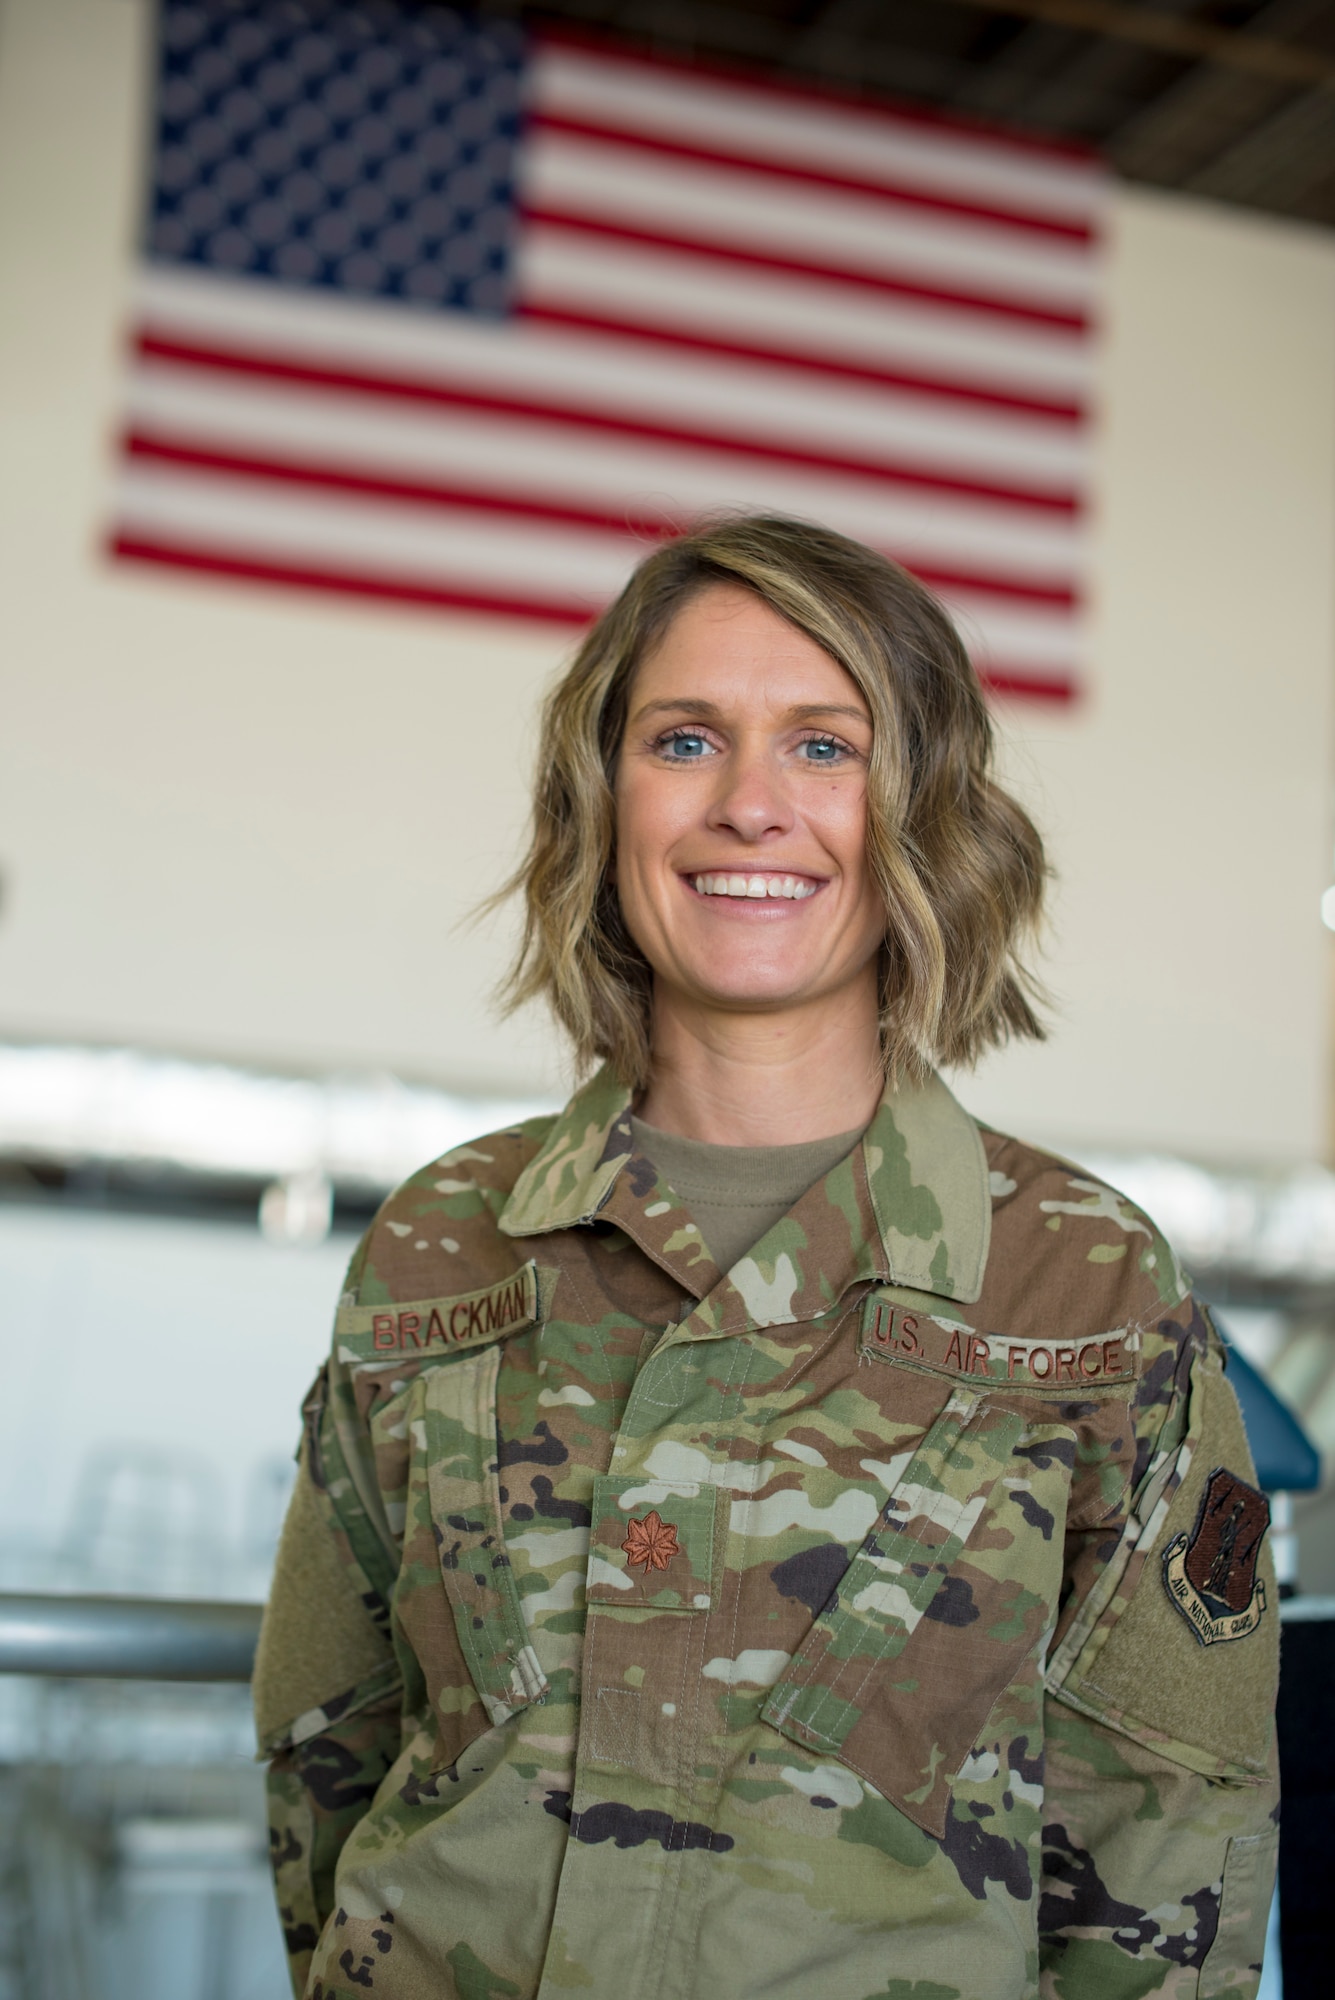 U.S. Air Force Major Shelley Brackman, 121st Medical Group, stands for a portrait August 24, 2020, at Rickenbacker Air National Guard Base, Ohio. Brackman has led an Ohio National Guard medical relief mission this year in response to COVID-19.  (U.S. Air National Guard photo by Ralph Branson)